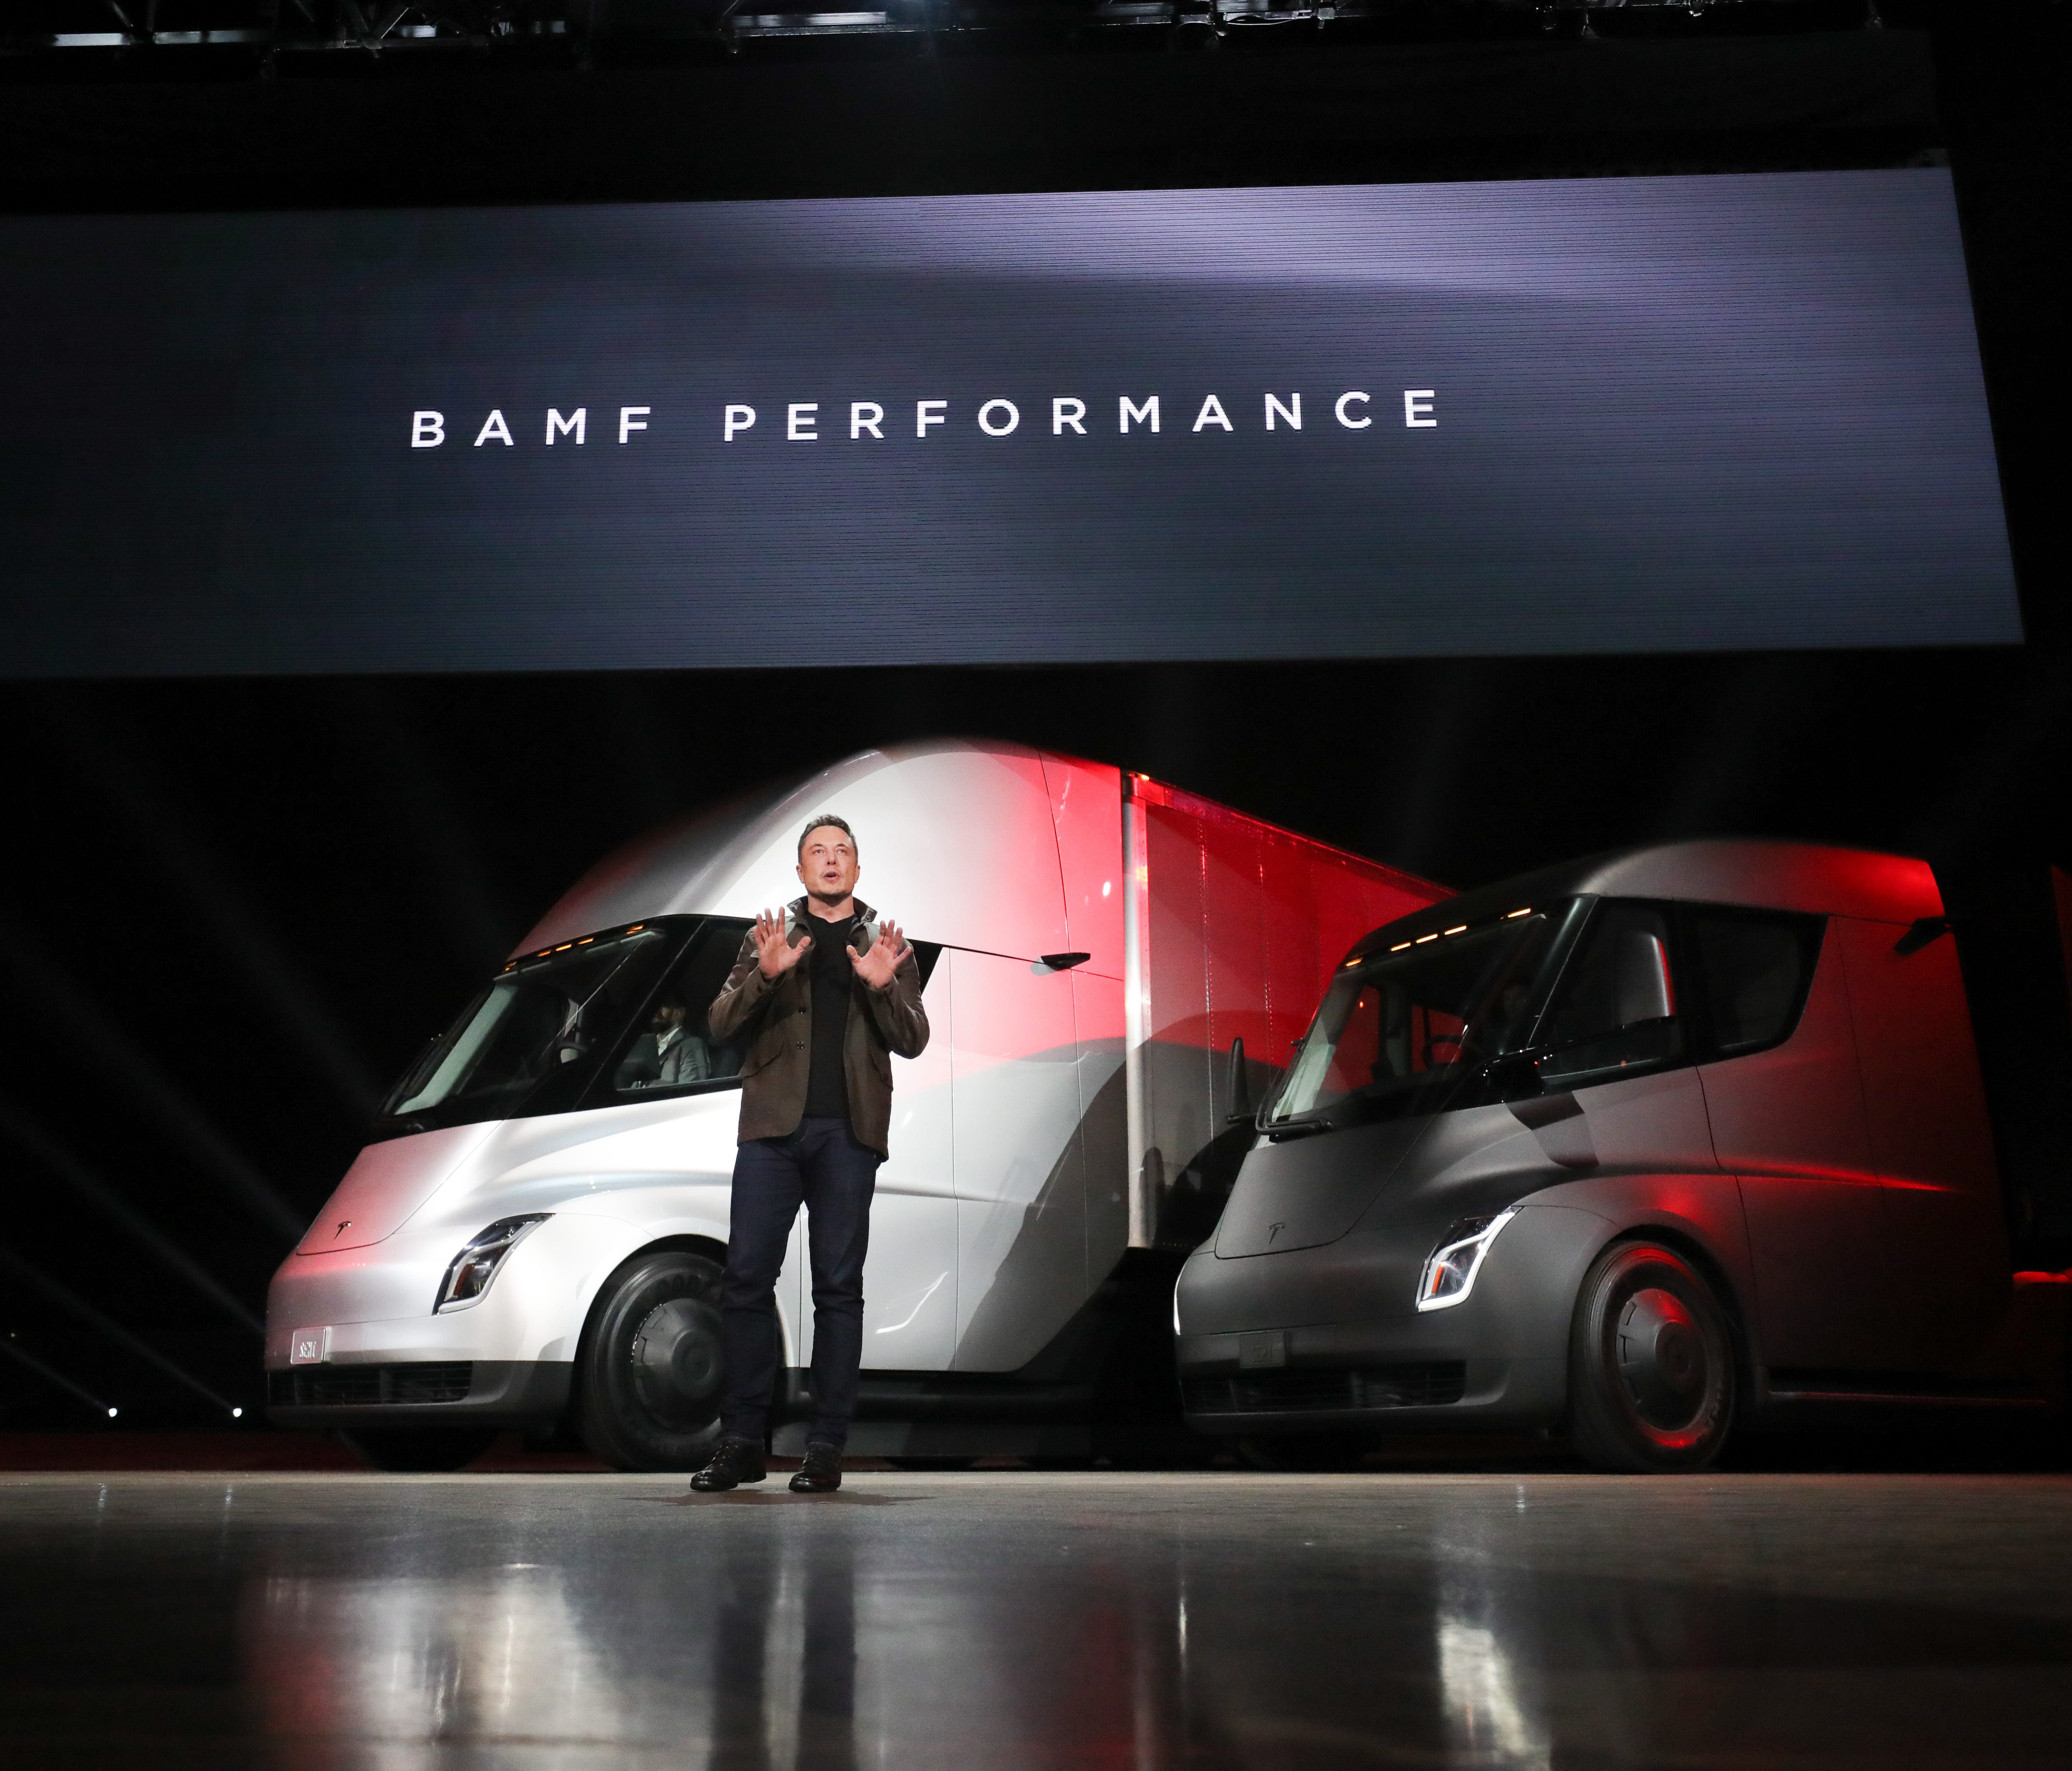 Elon Musk unveils his new Tesla Semi trucks in Los Angeles Thursday. The acronym can't be spelled out here, but think fast.